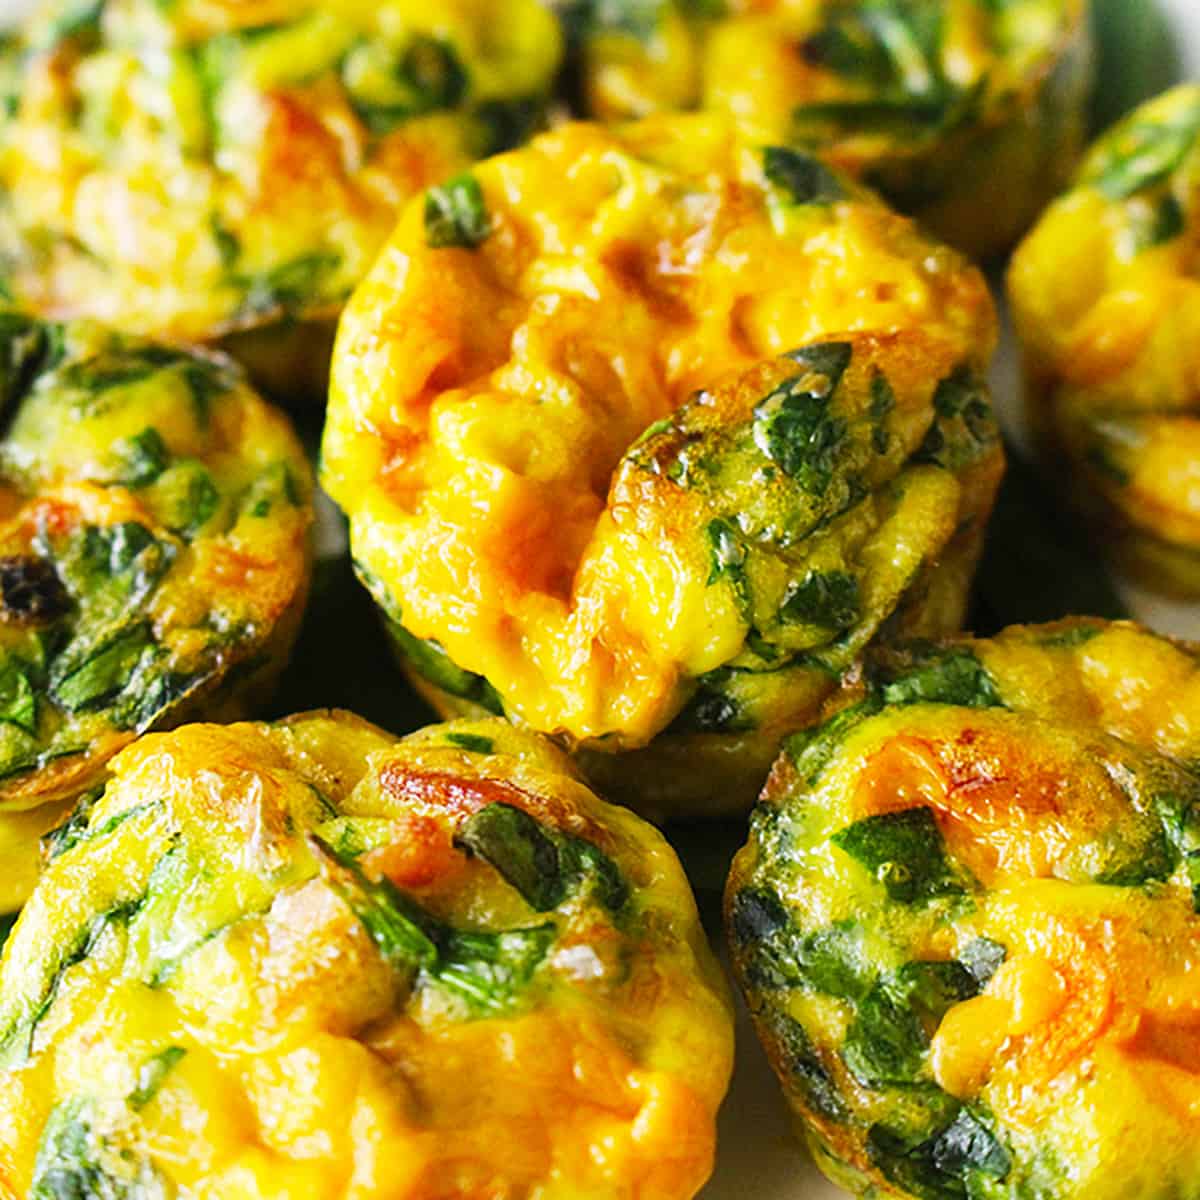 https://urbanblisslife.com/wp-content/uploads/2017/05/Cheesy-Spinach-Frittatas-FEATURE.jpg